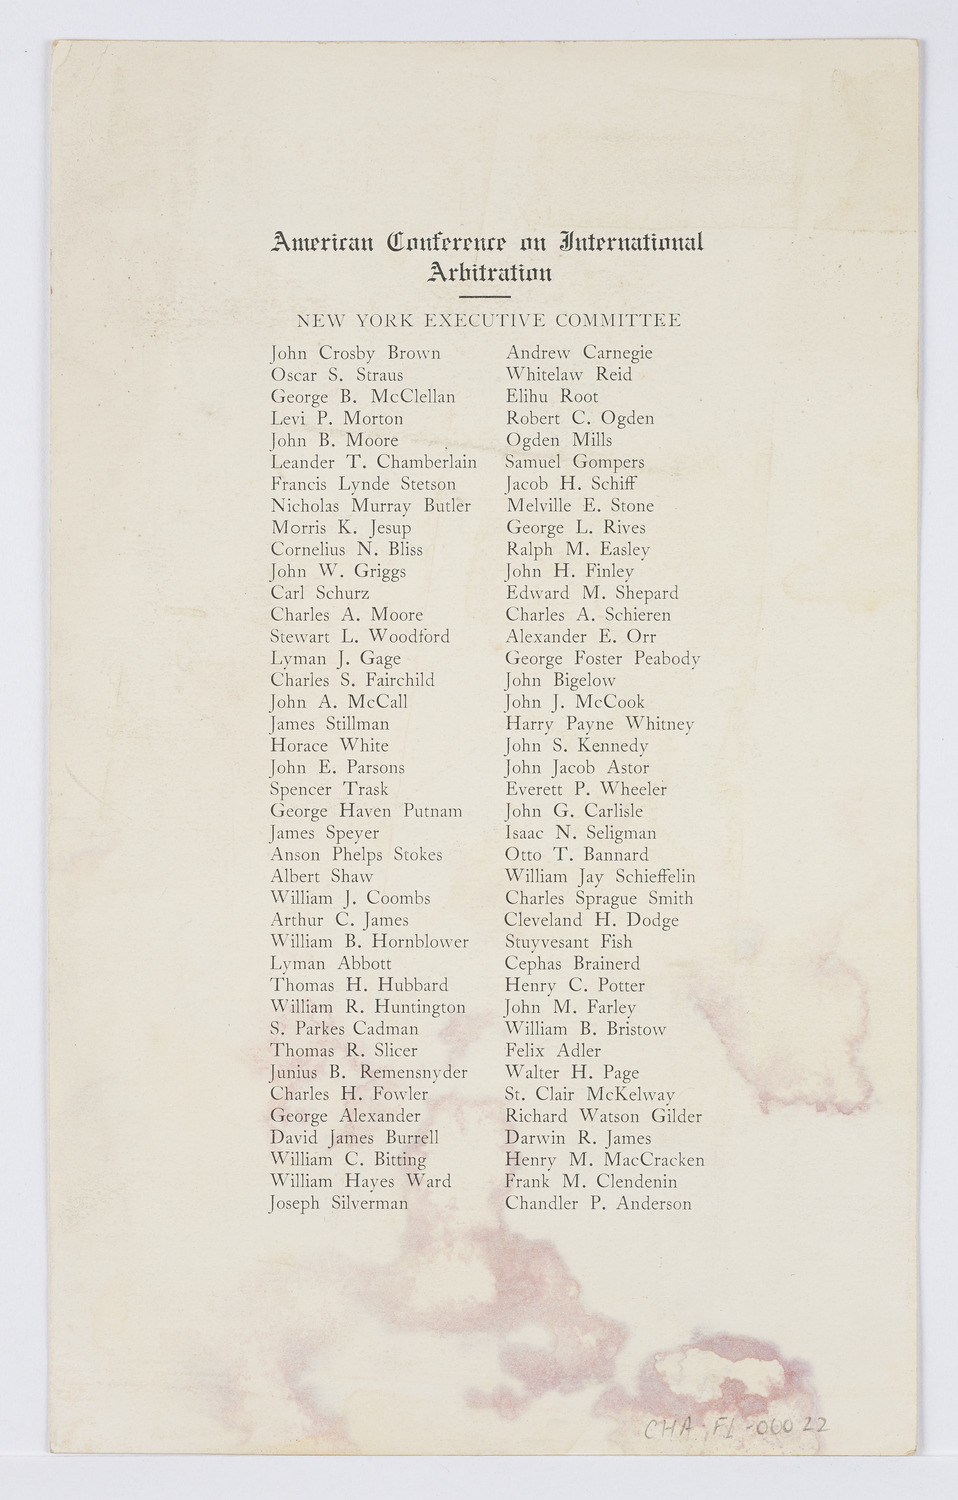 Meeting: American Conference on International Arbitration, December 16, 1904